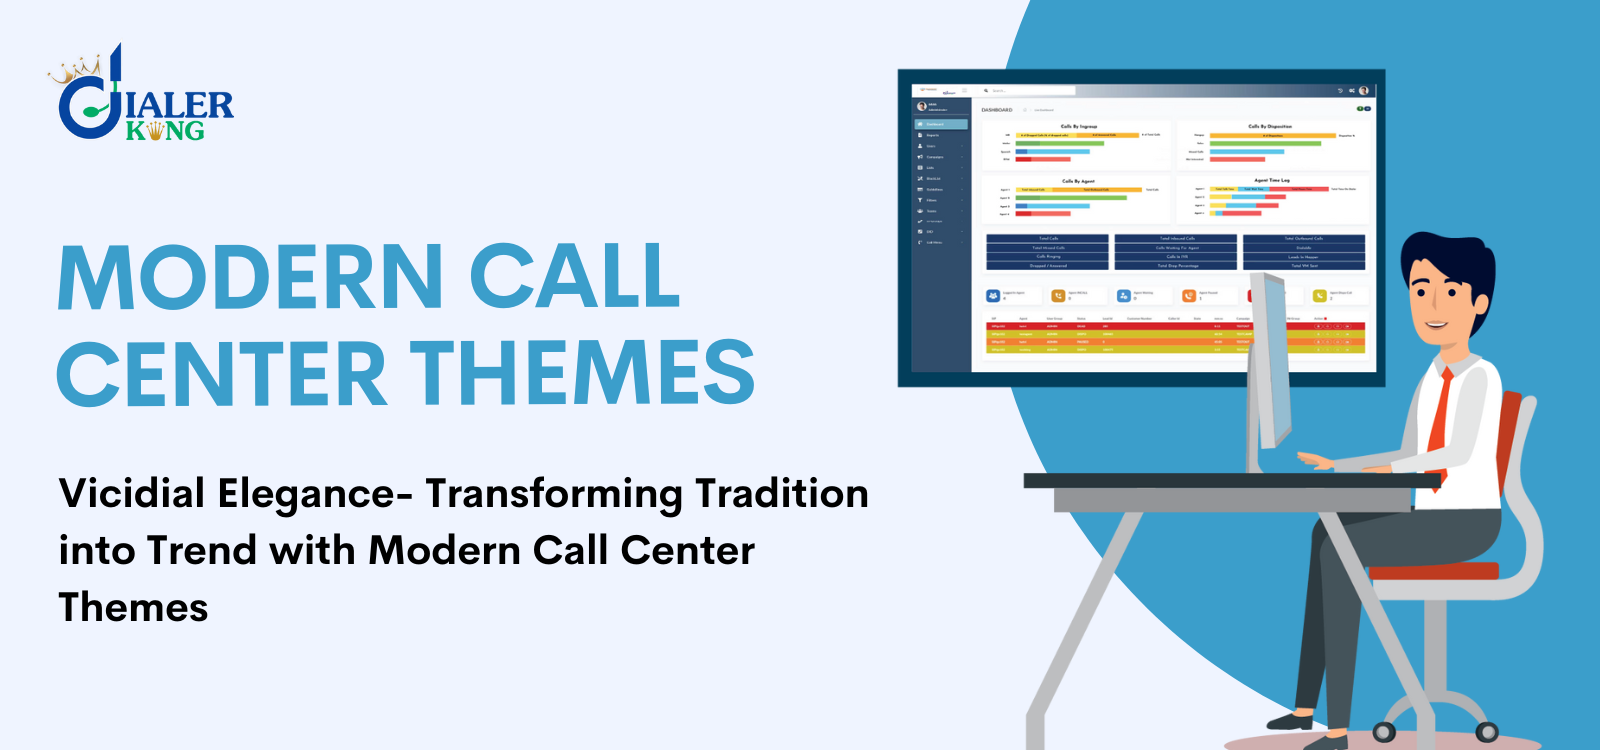 Vicidial Elegance- Transforming Tradition into Trend with Modern Call Center Themes